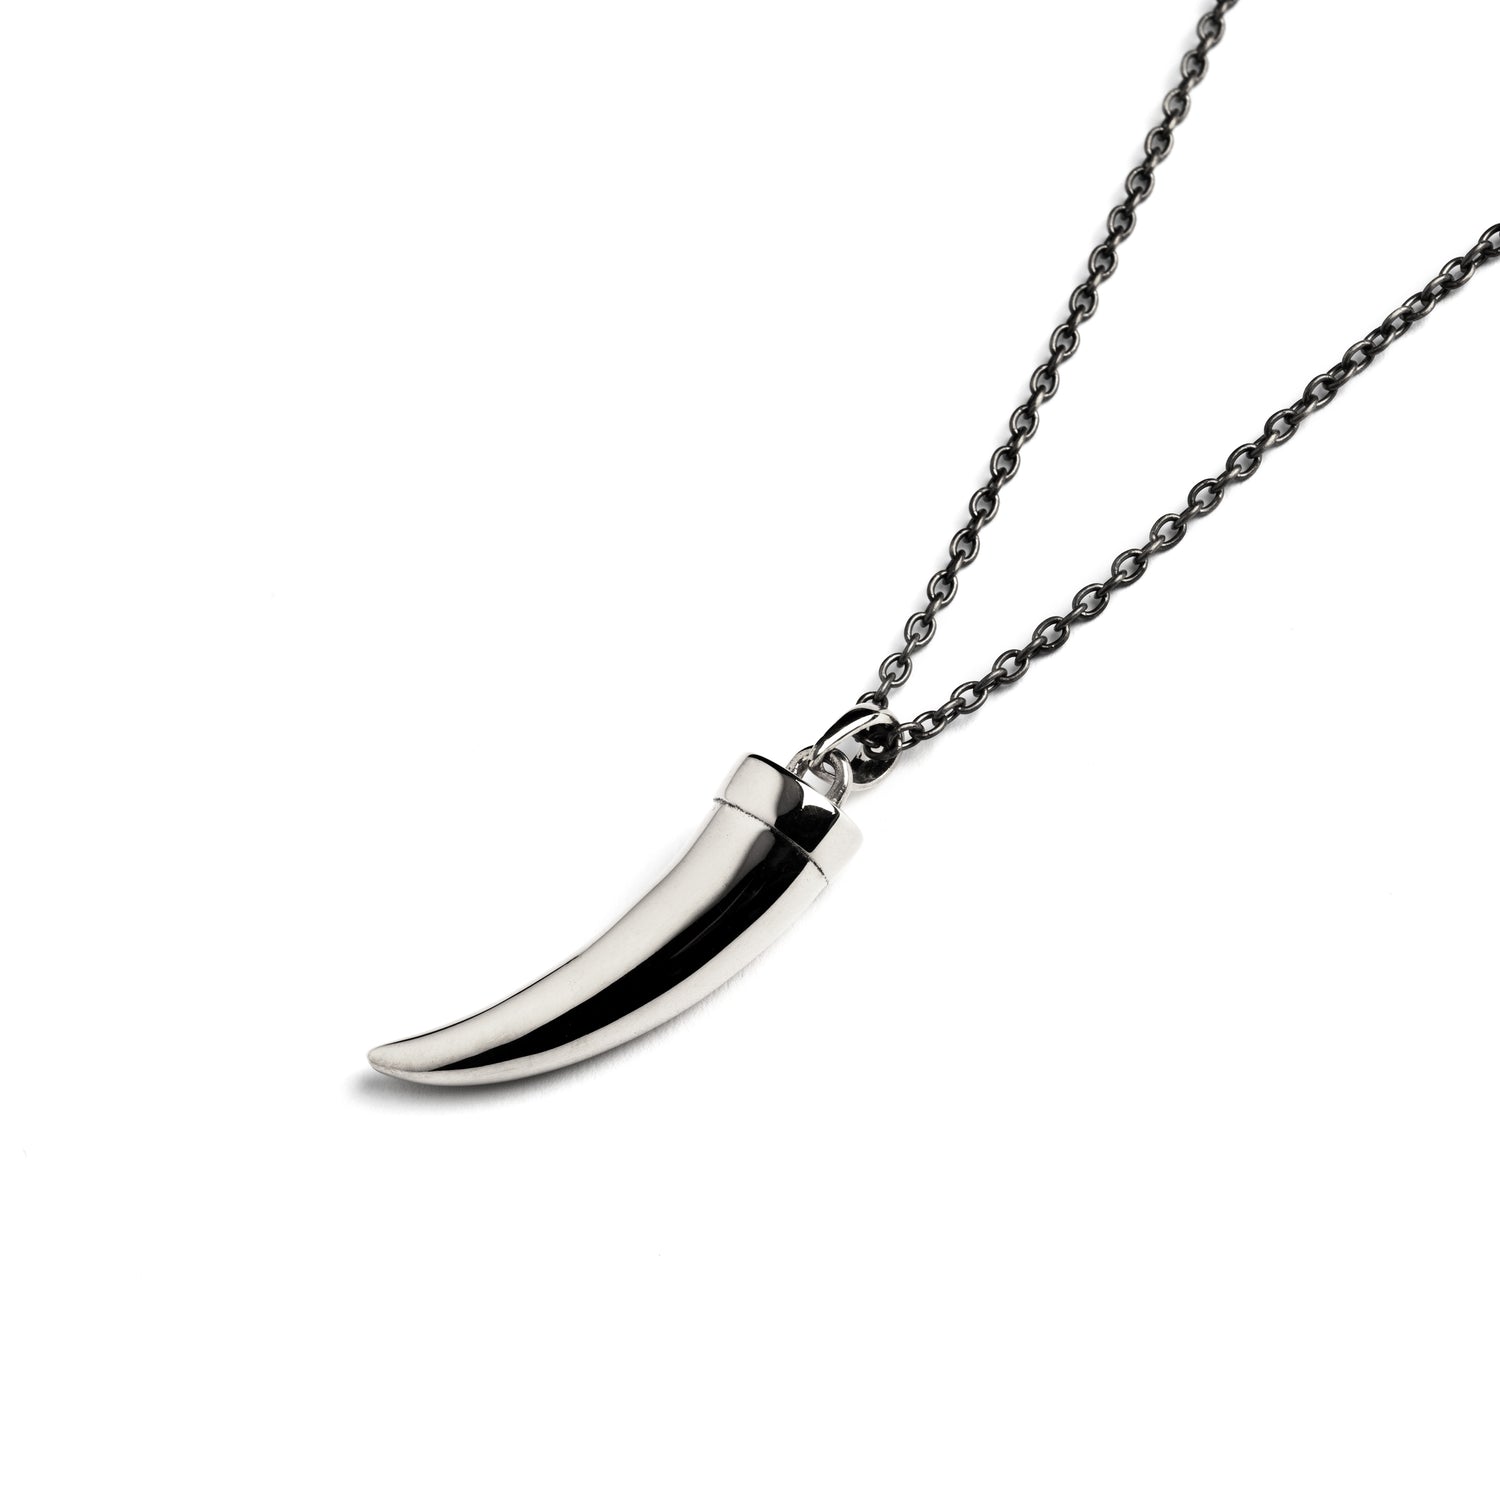 Tusk Silver Necklace right side view